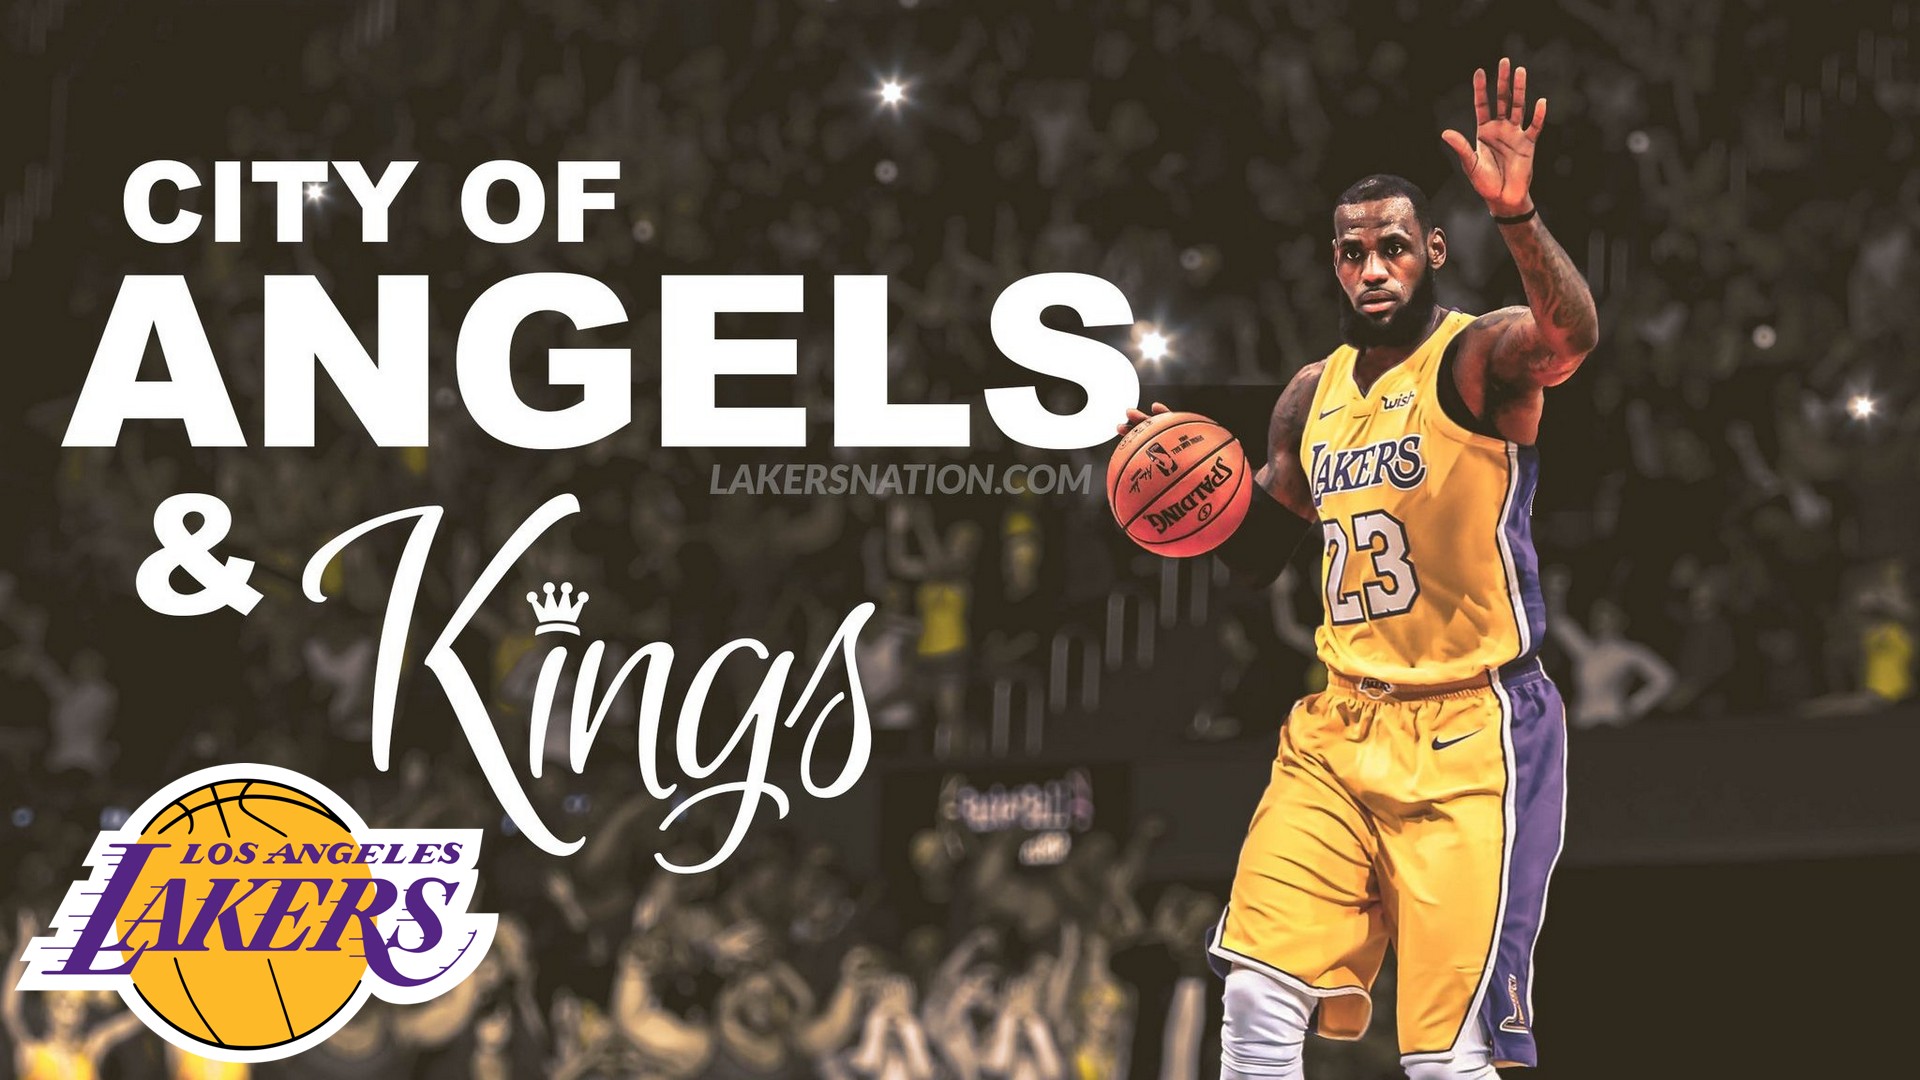 Wallpapers LeBron James Lakers with image dimensions 1920x1080 pixel. You can make this wallpaper for your Desktop Computer Backgrounds, Windows or Mac Screensavers, iPhone Lock screen, Tablet or Android and another Mobile Phone device